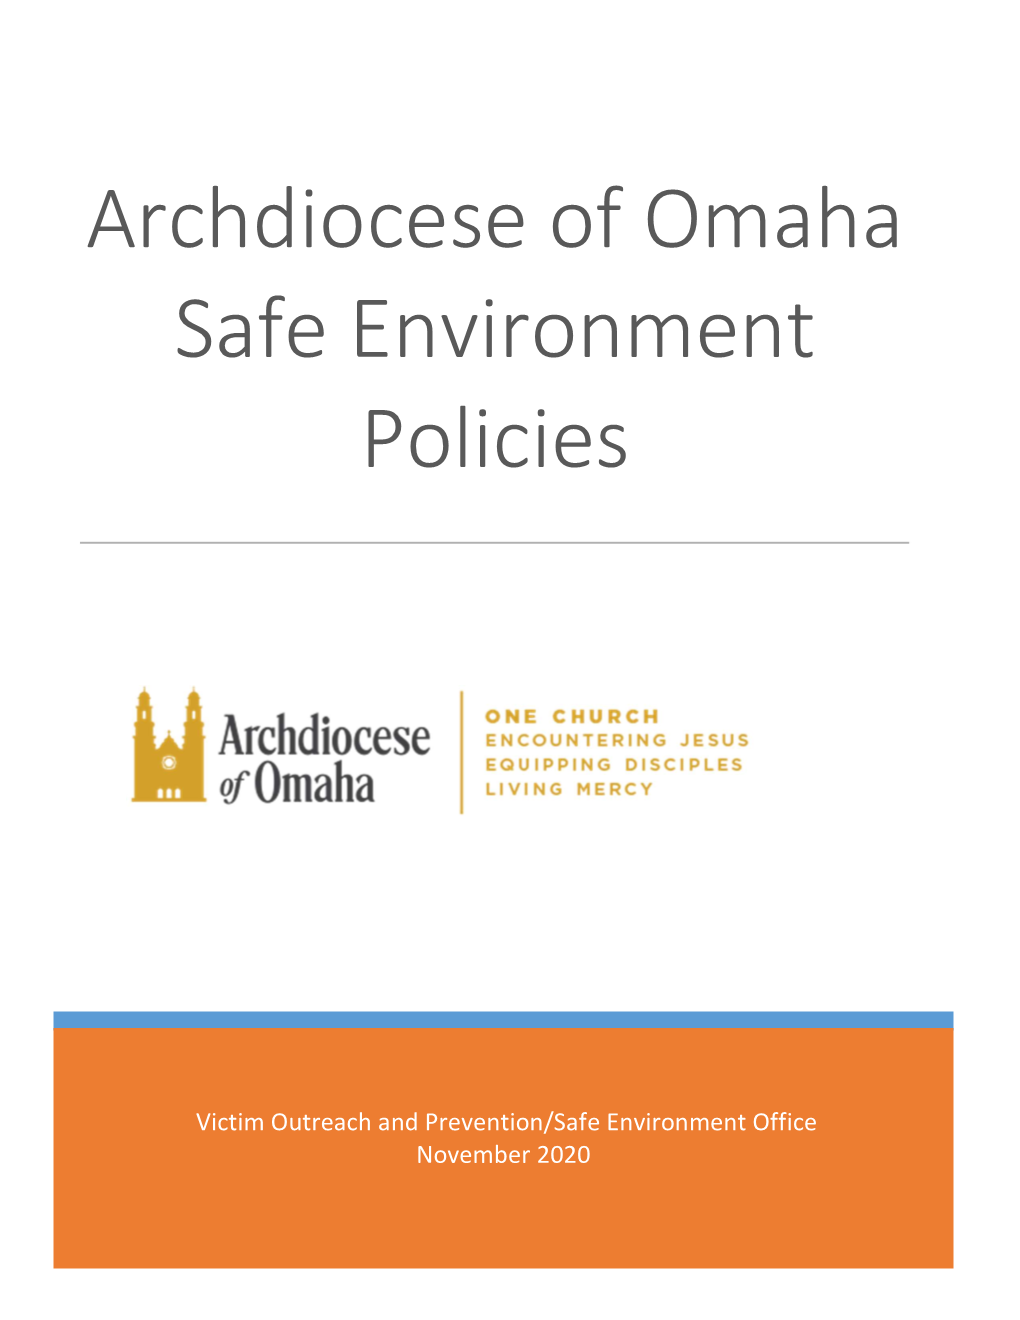 Archdiocese of Omaha Safe Environment Policies